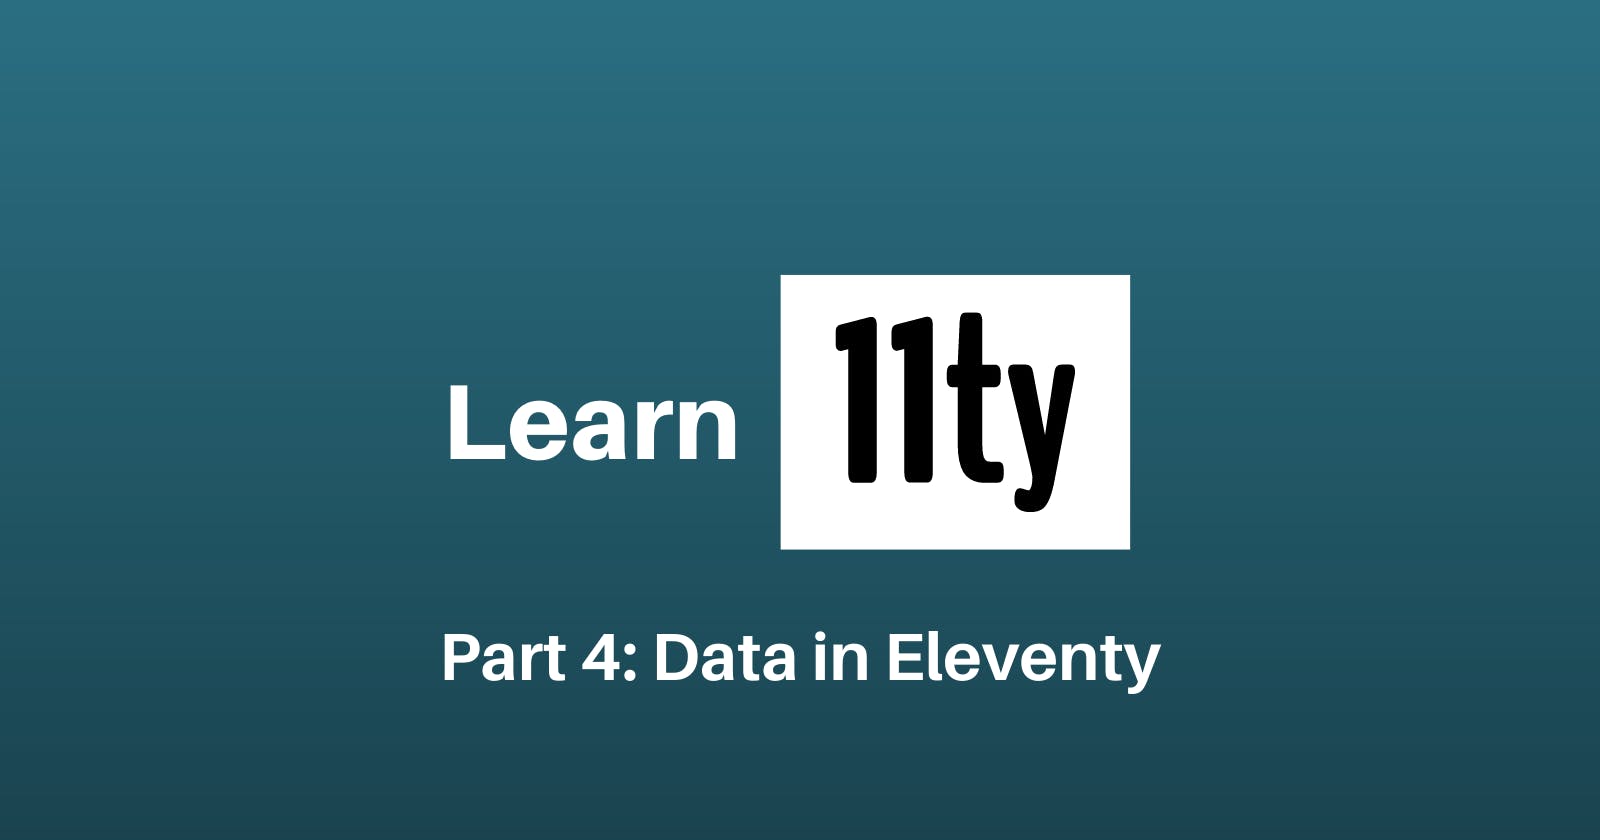 Let's Learn 11ty Part 4